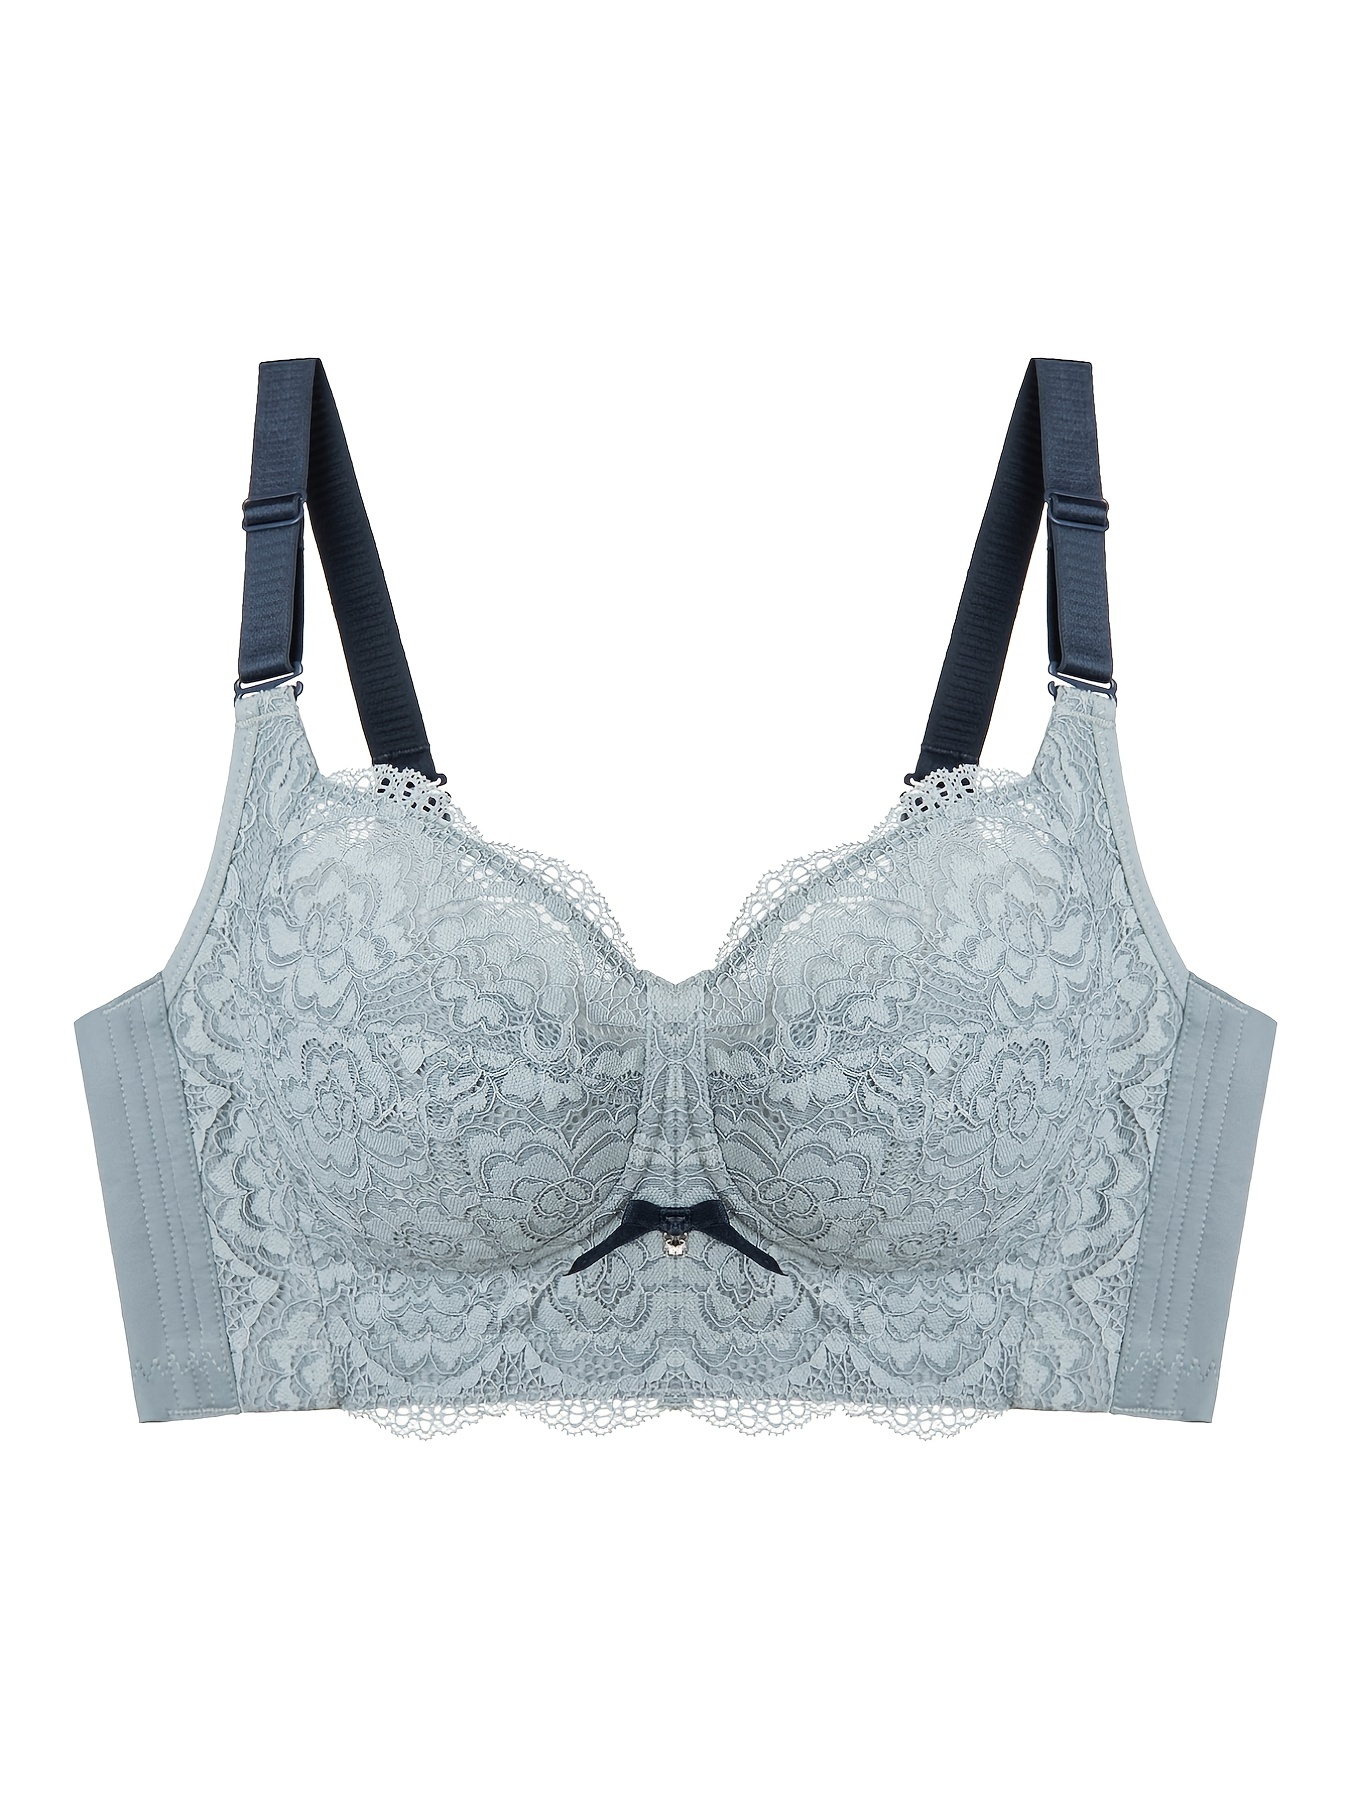  Womens Full Coverage Floral Lace Underwired Bra Plus Size  Non Padded Comfort Bra 32DD Grey